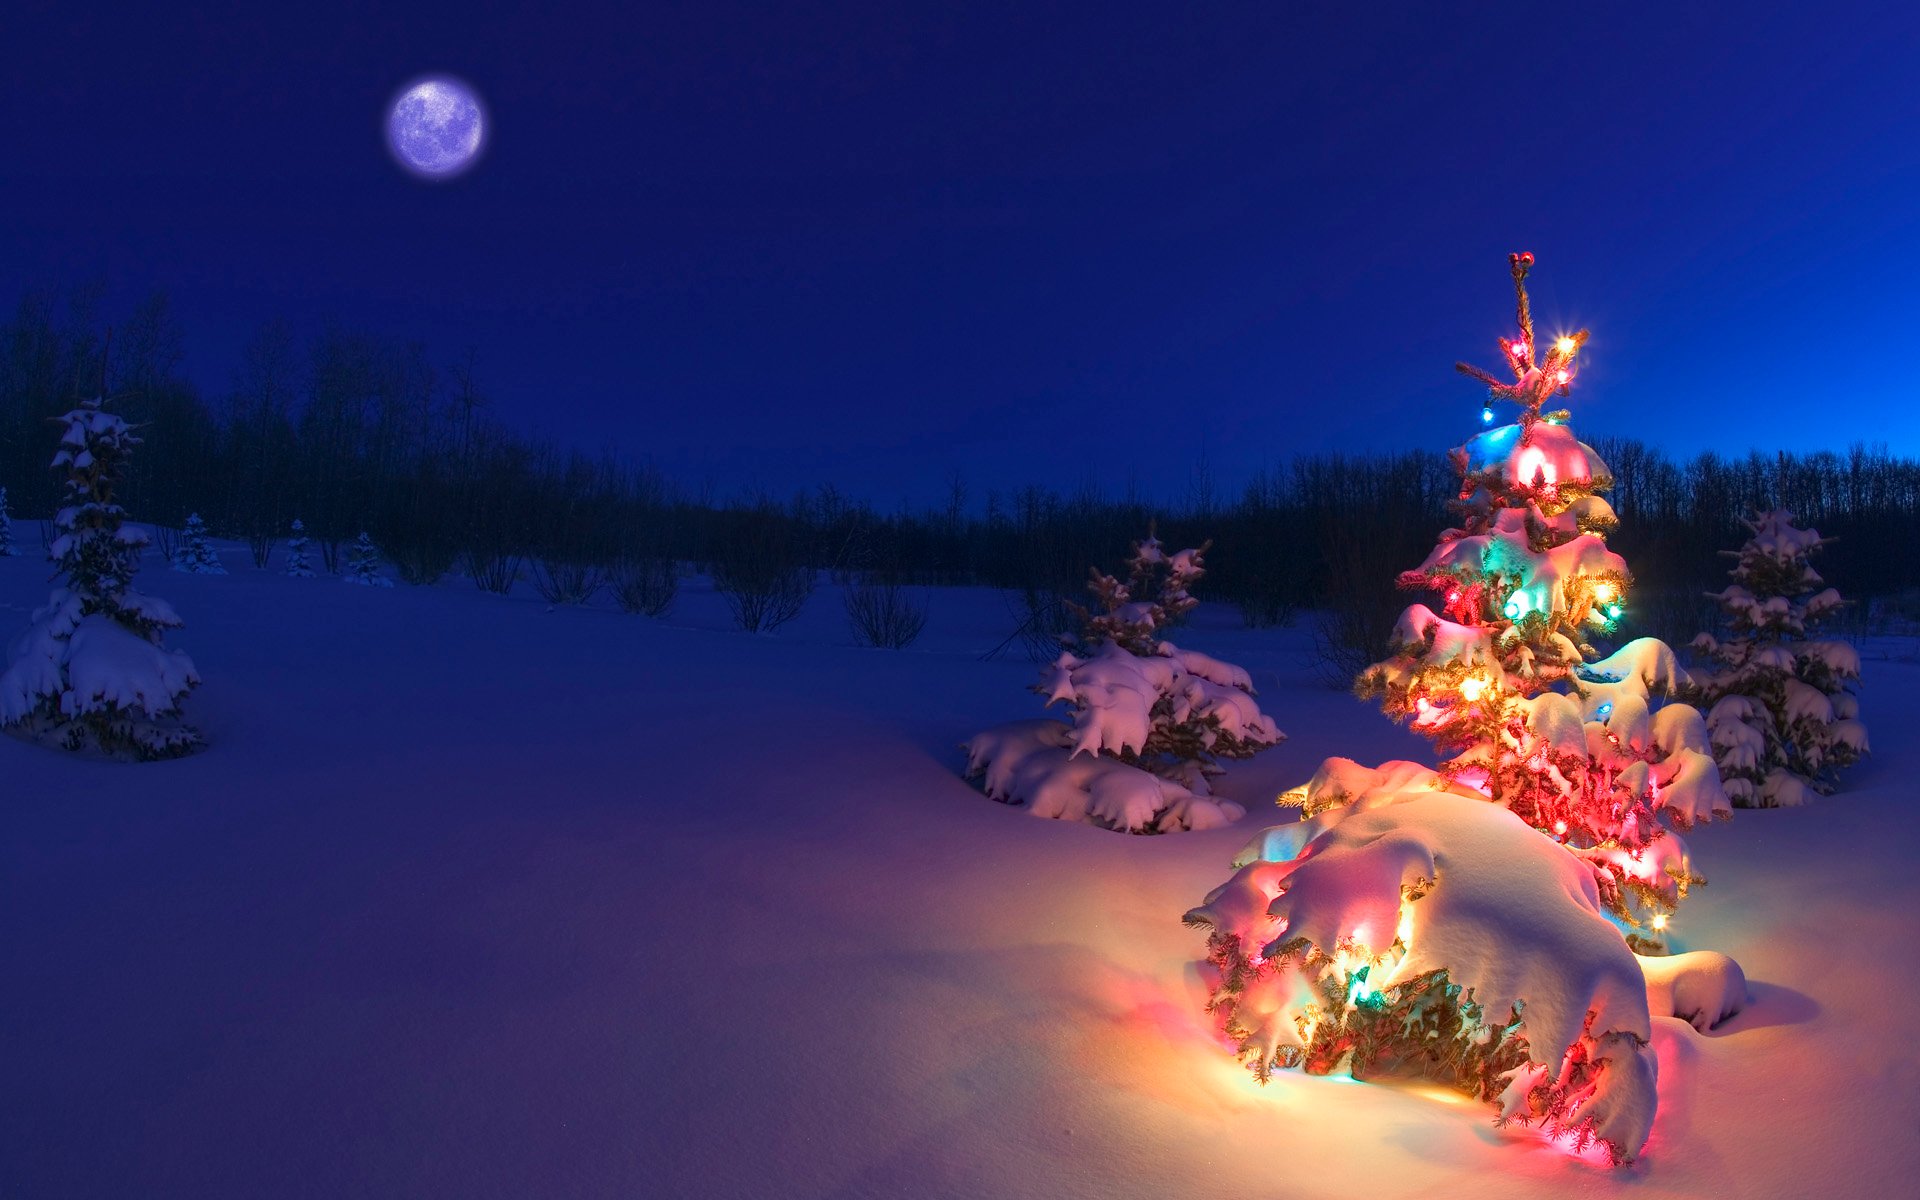 Wallpaper Of A Christmas Tree In Snowy Night Free Wallpaper World